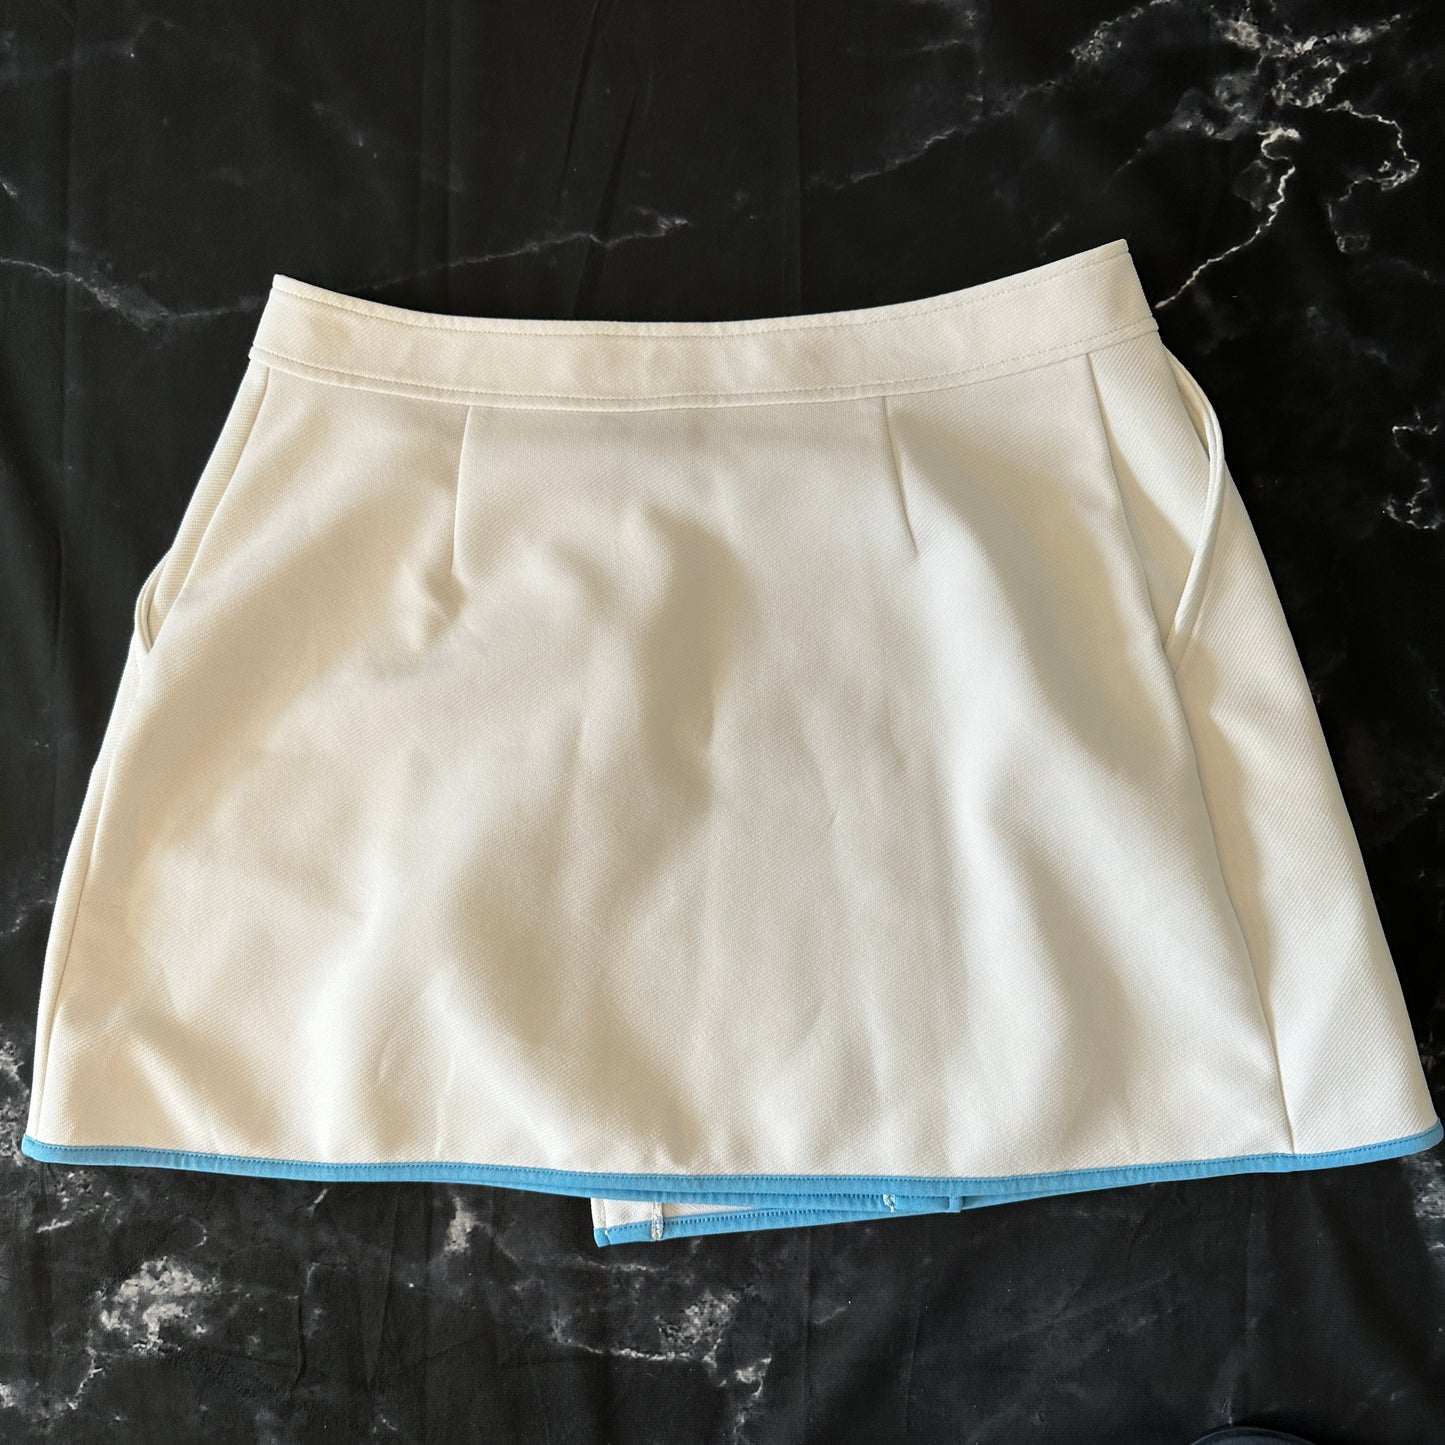 Maggia Vintage 80s Tennis Skirt - IV - Made in Italy